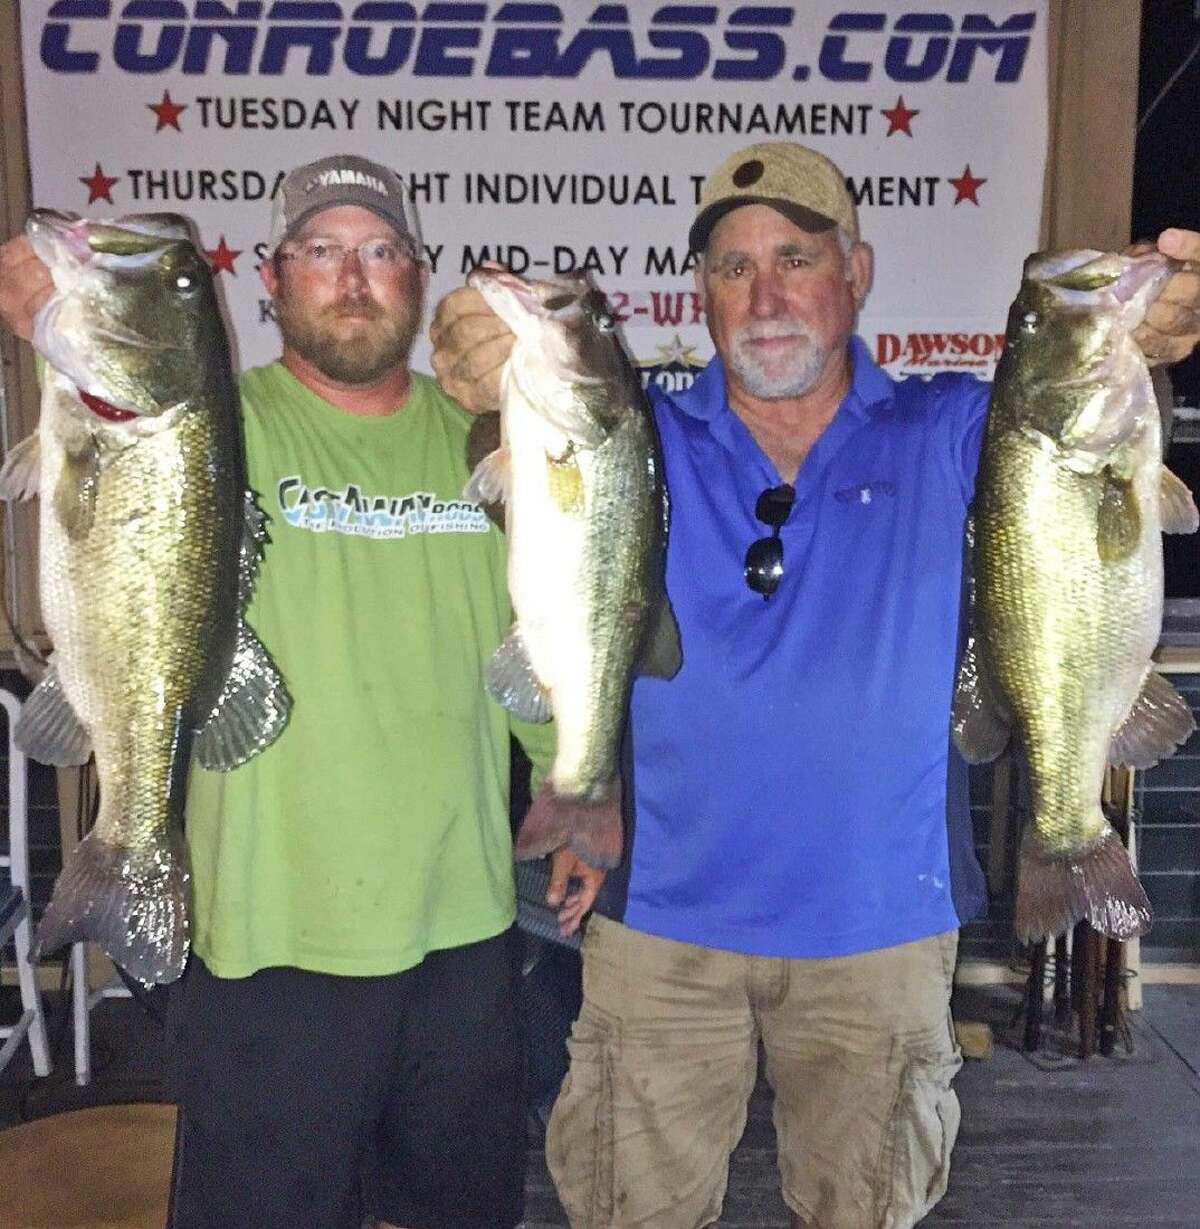 Jeff Randolph and Ken Robinson came in first place in the CONROEBASS Tuesday tournament with a total stringer weight of 17.40 pounds.